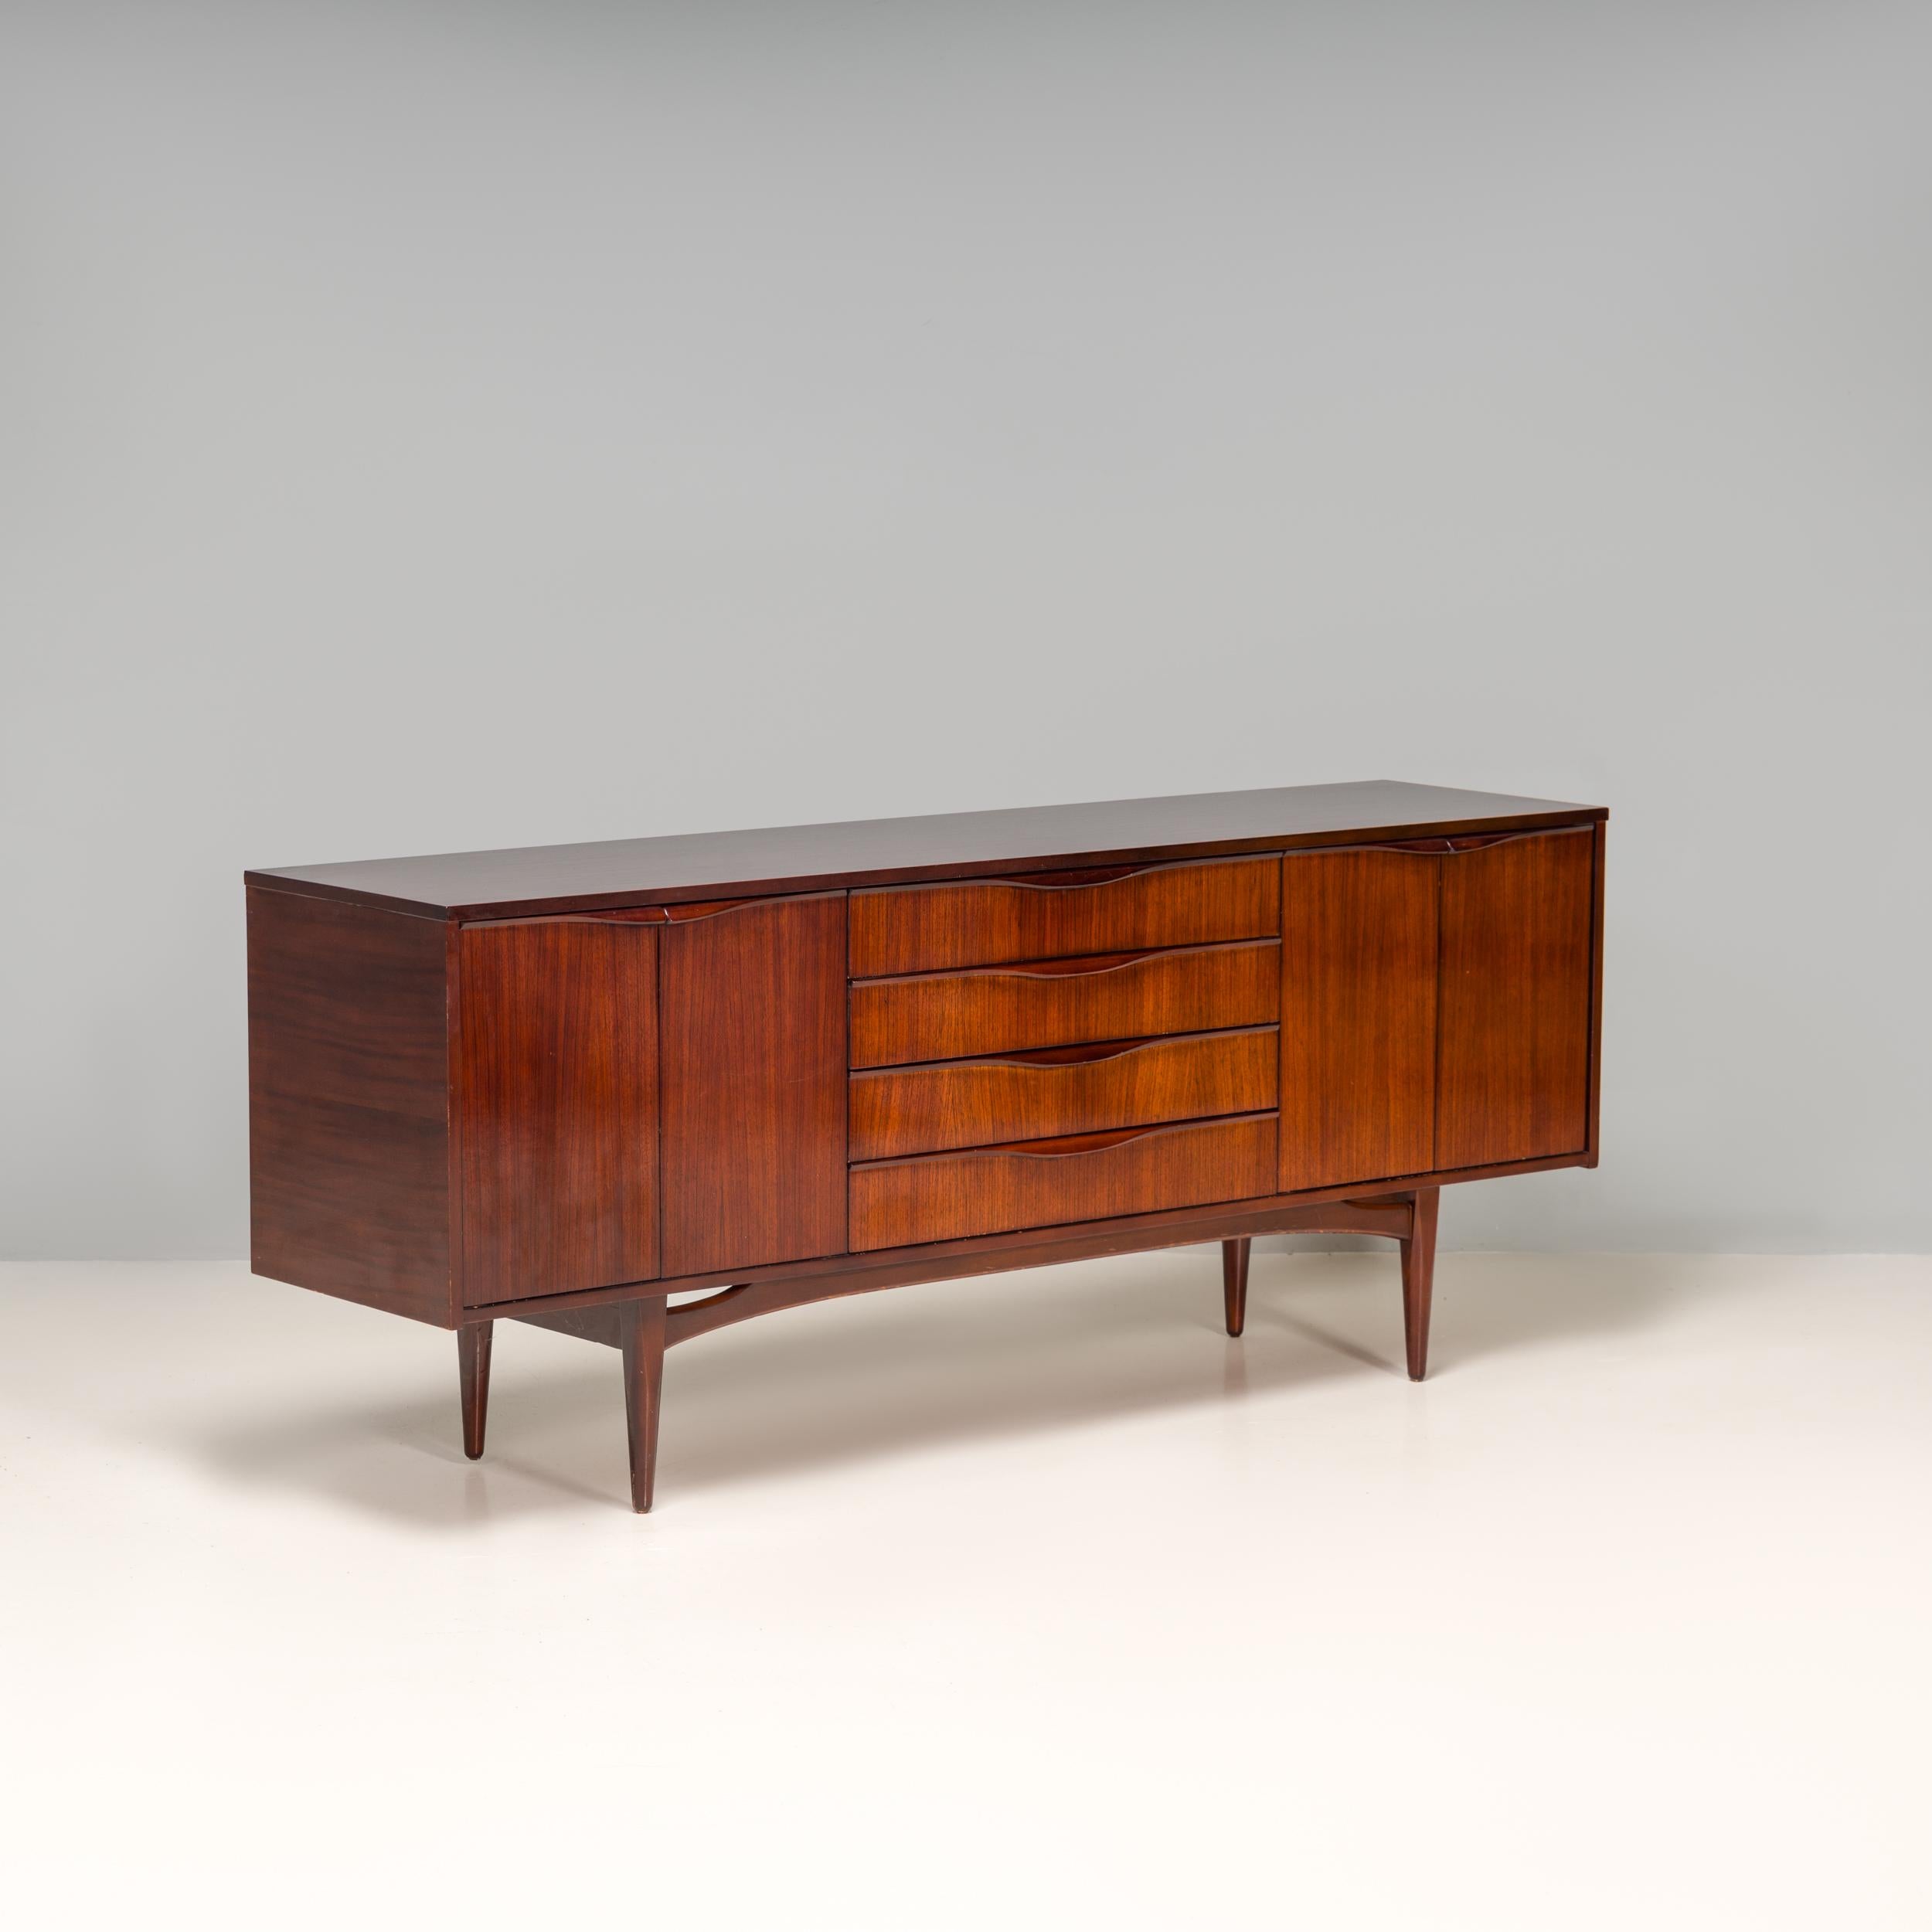 Made by British manufacturer Elliots of Newbury, this 1963 sideboard is a fantastic example of mid century design.

Constructed from Rosewood, the sideboard features two compartments at either side, opening with a set of double doors.

The centre of